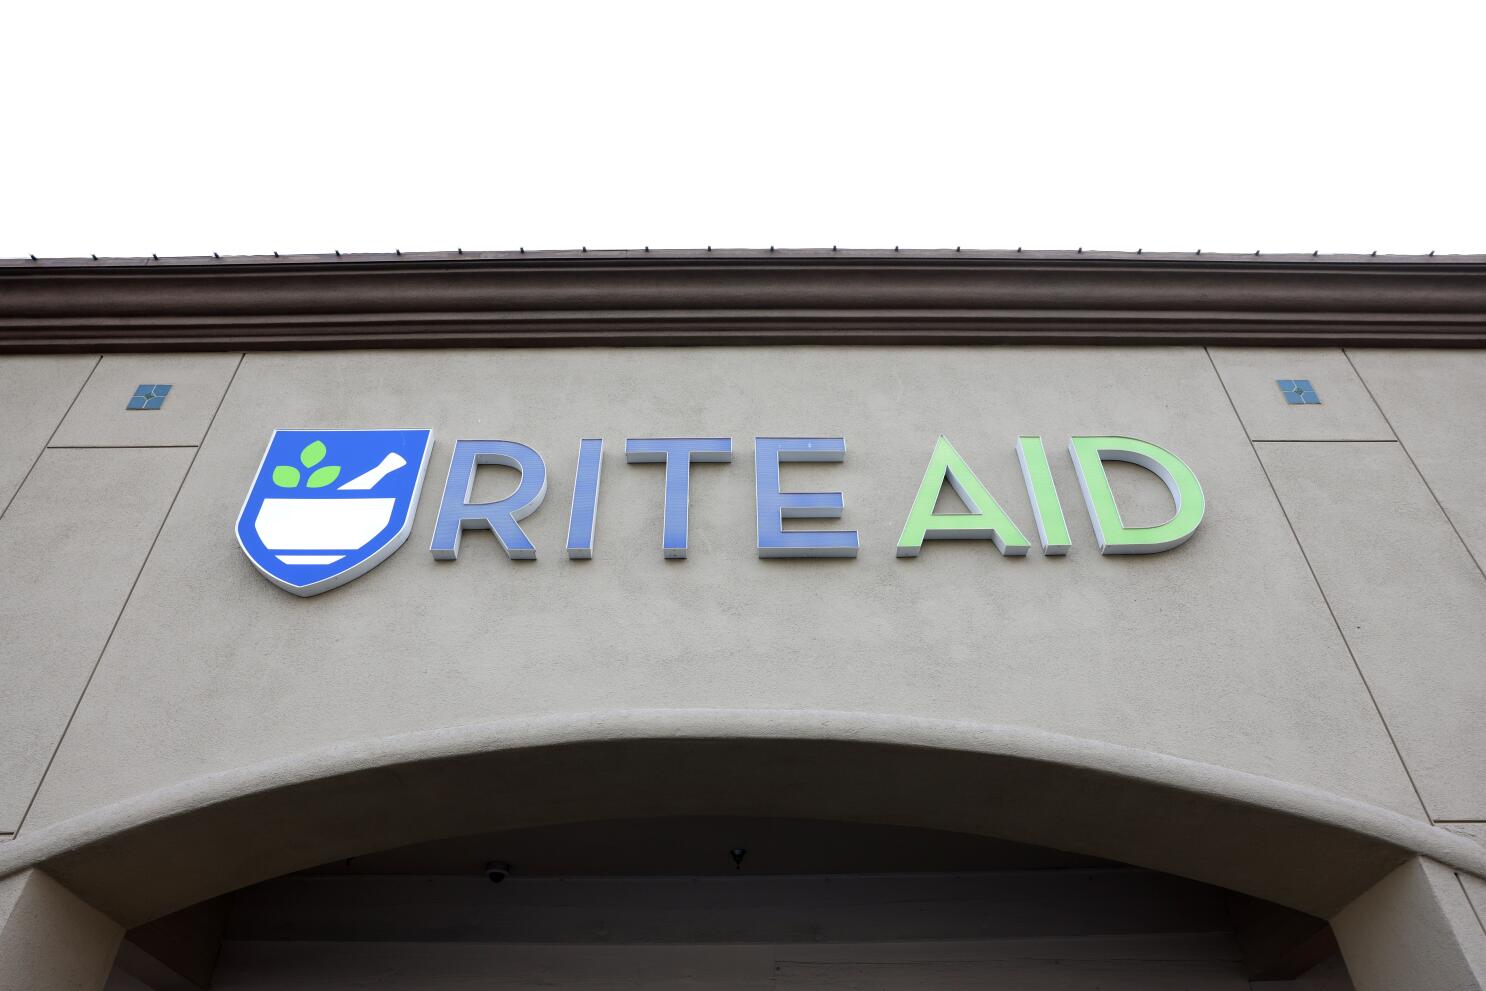 Rite Aid files for bankruptcy, will shut some stores - Los Angeles